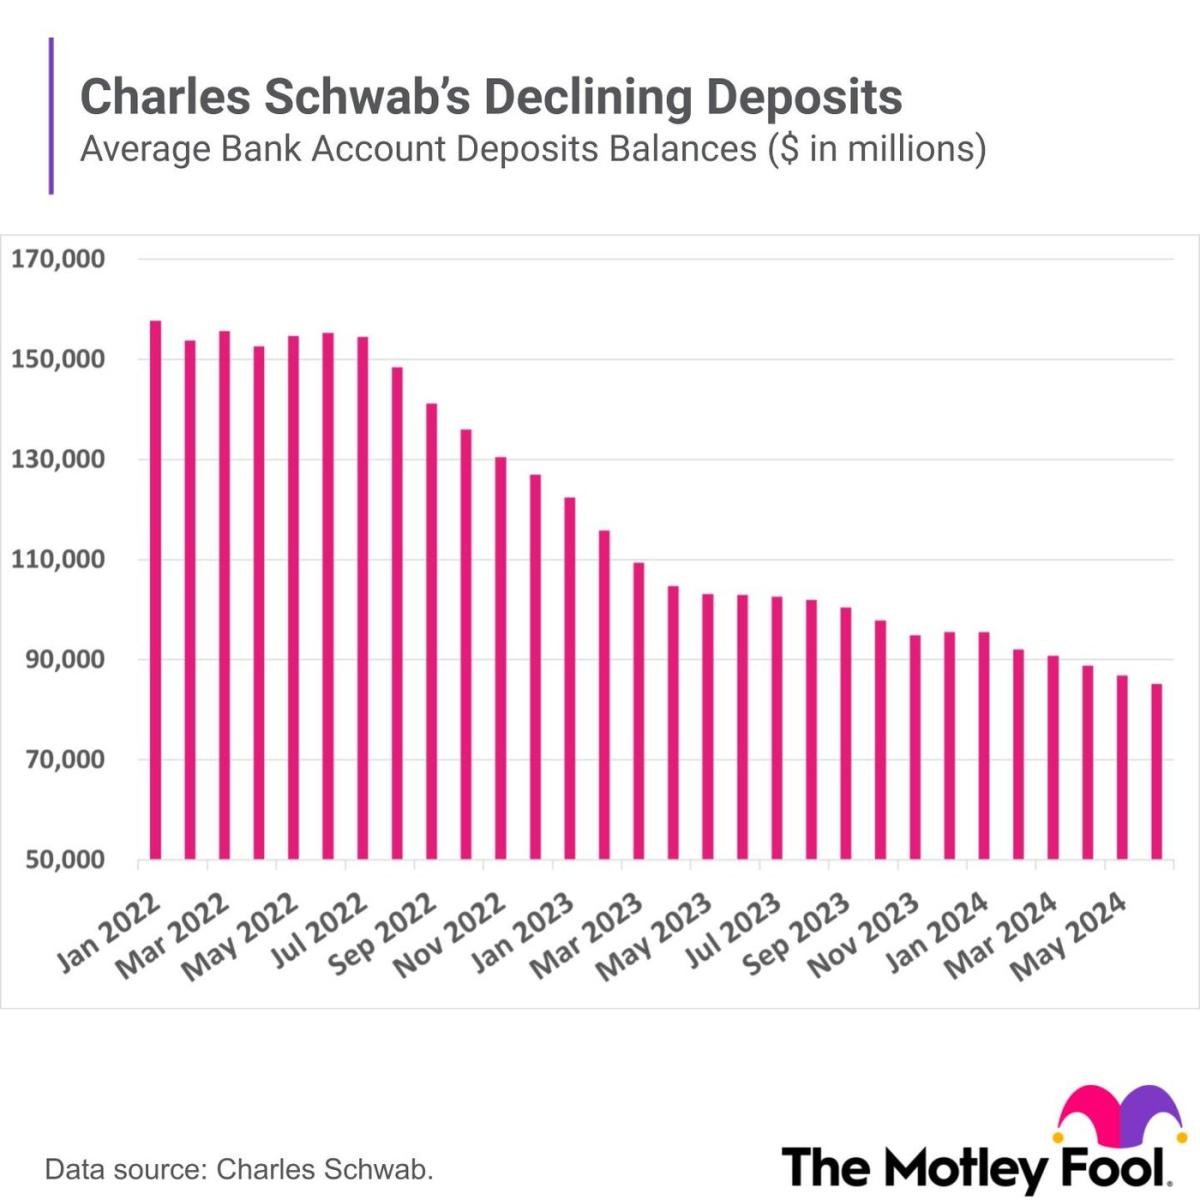 charles-schwab-stock-plummeted-19%-in-the-days-following-its-earnings-announcement-here’s-why.